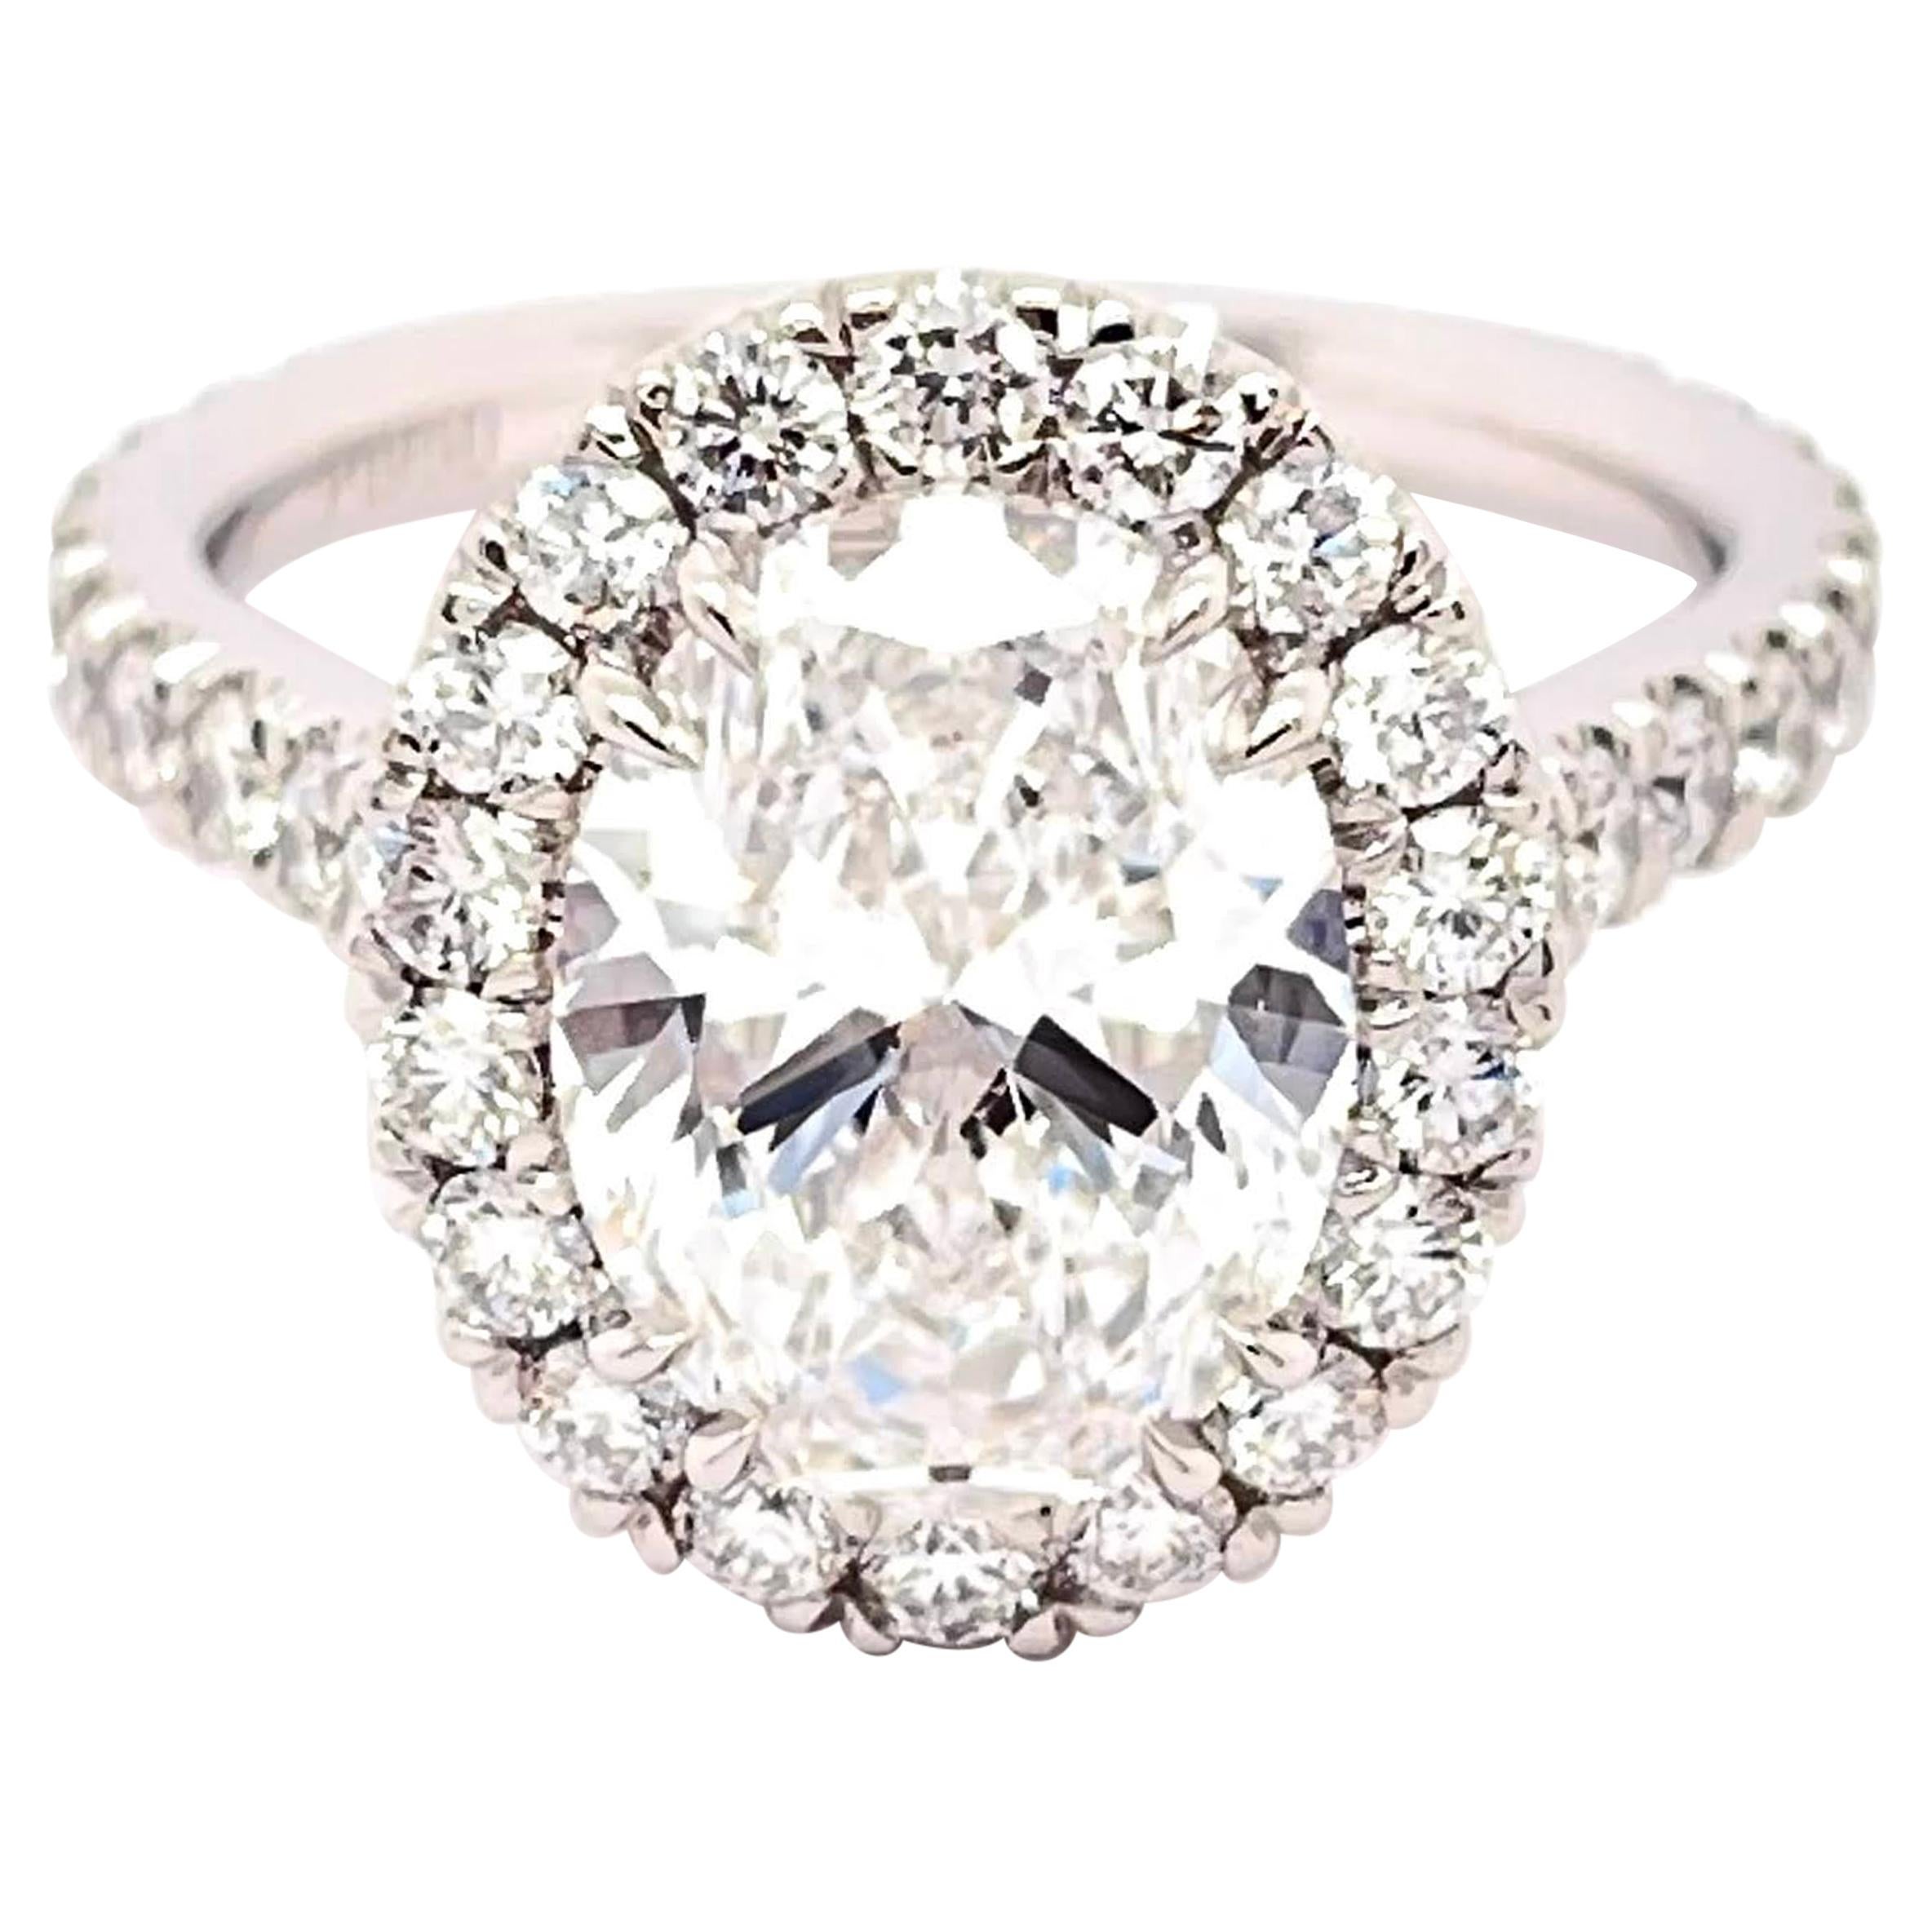 GIA Certified 3.01 Carat Oval Diamond Engagement Ring